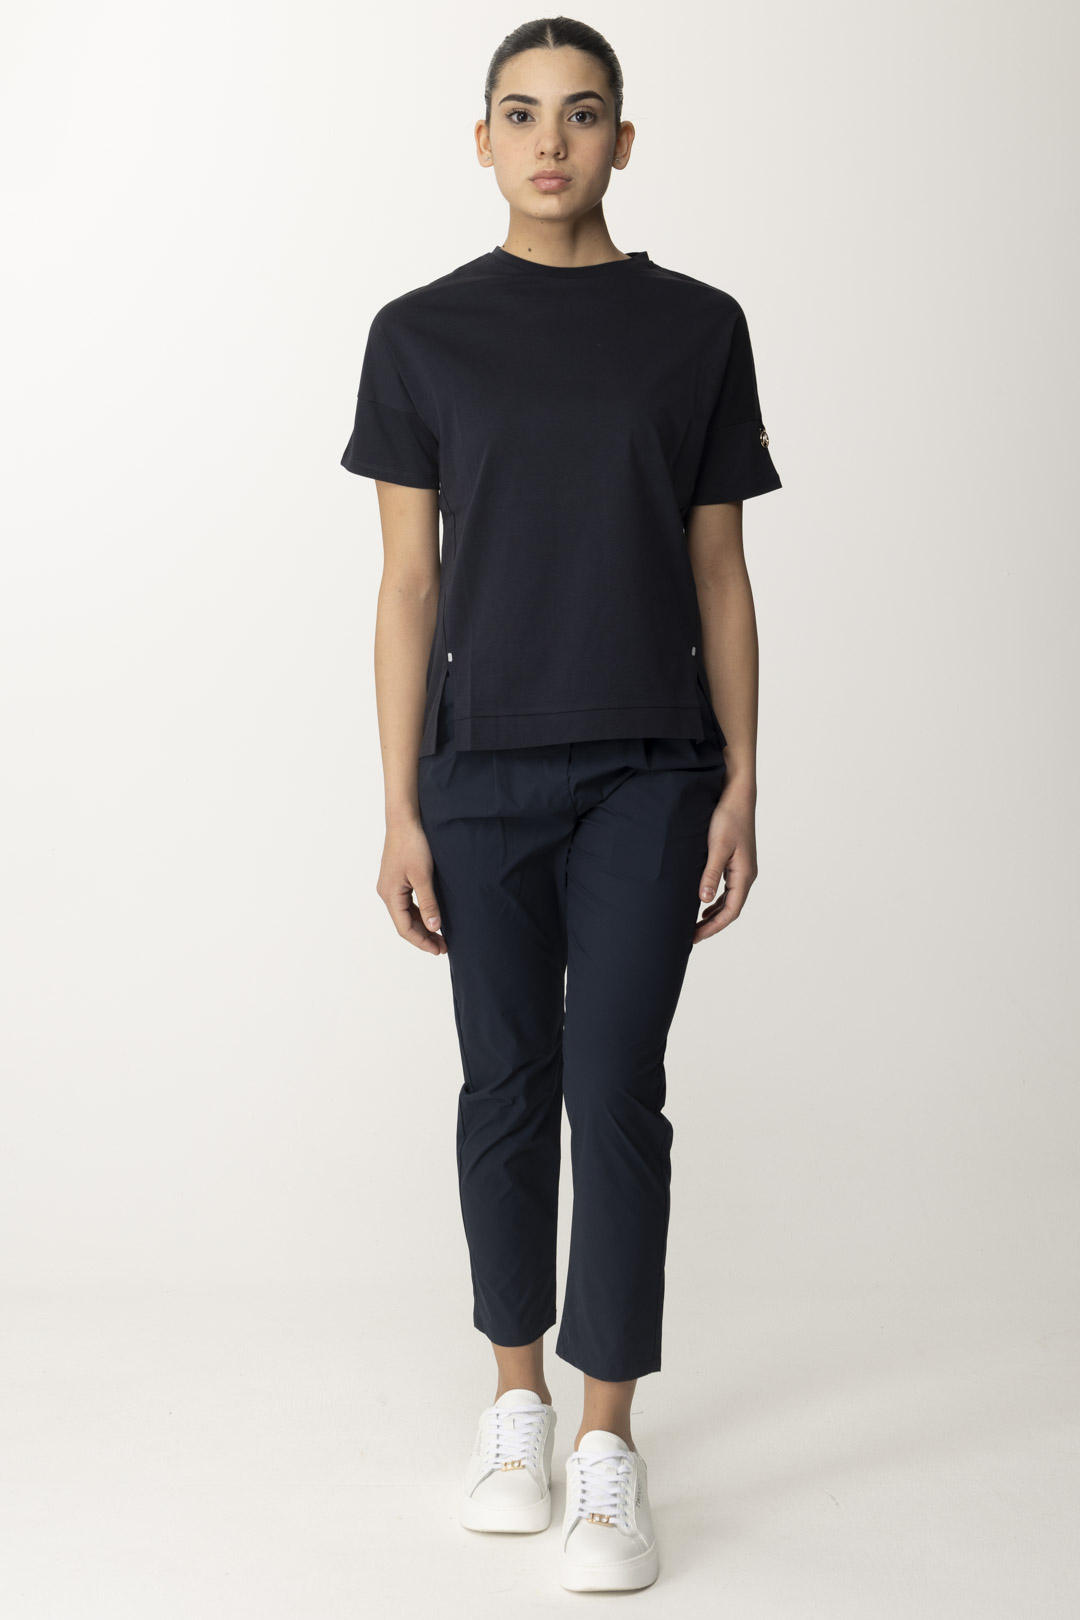 Preview: People Of Shibuya Joggers trousers Nero